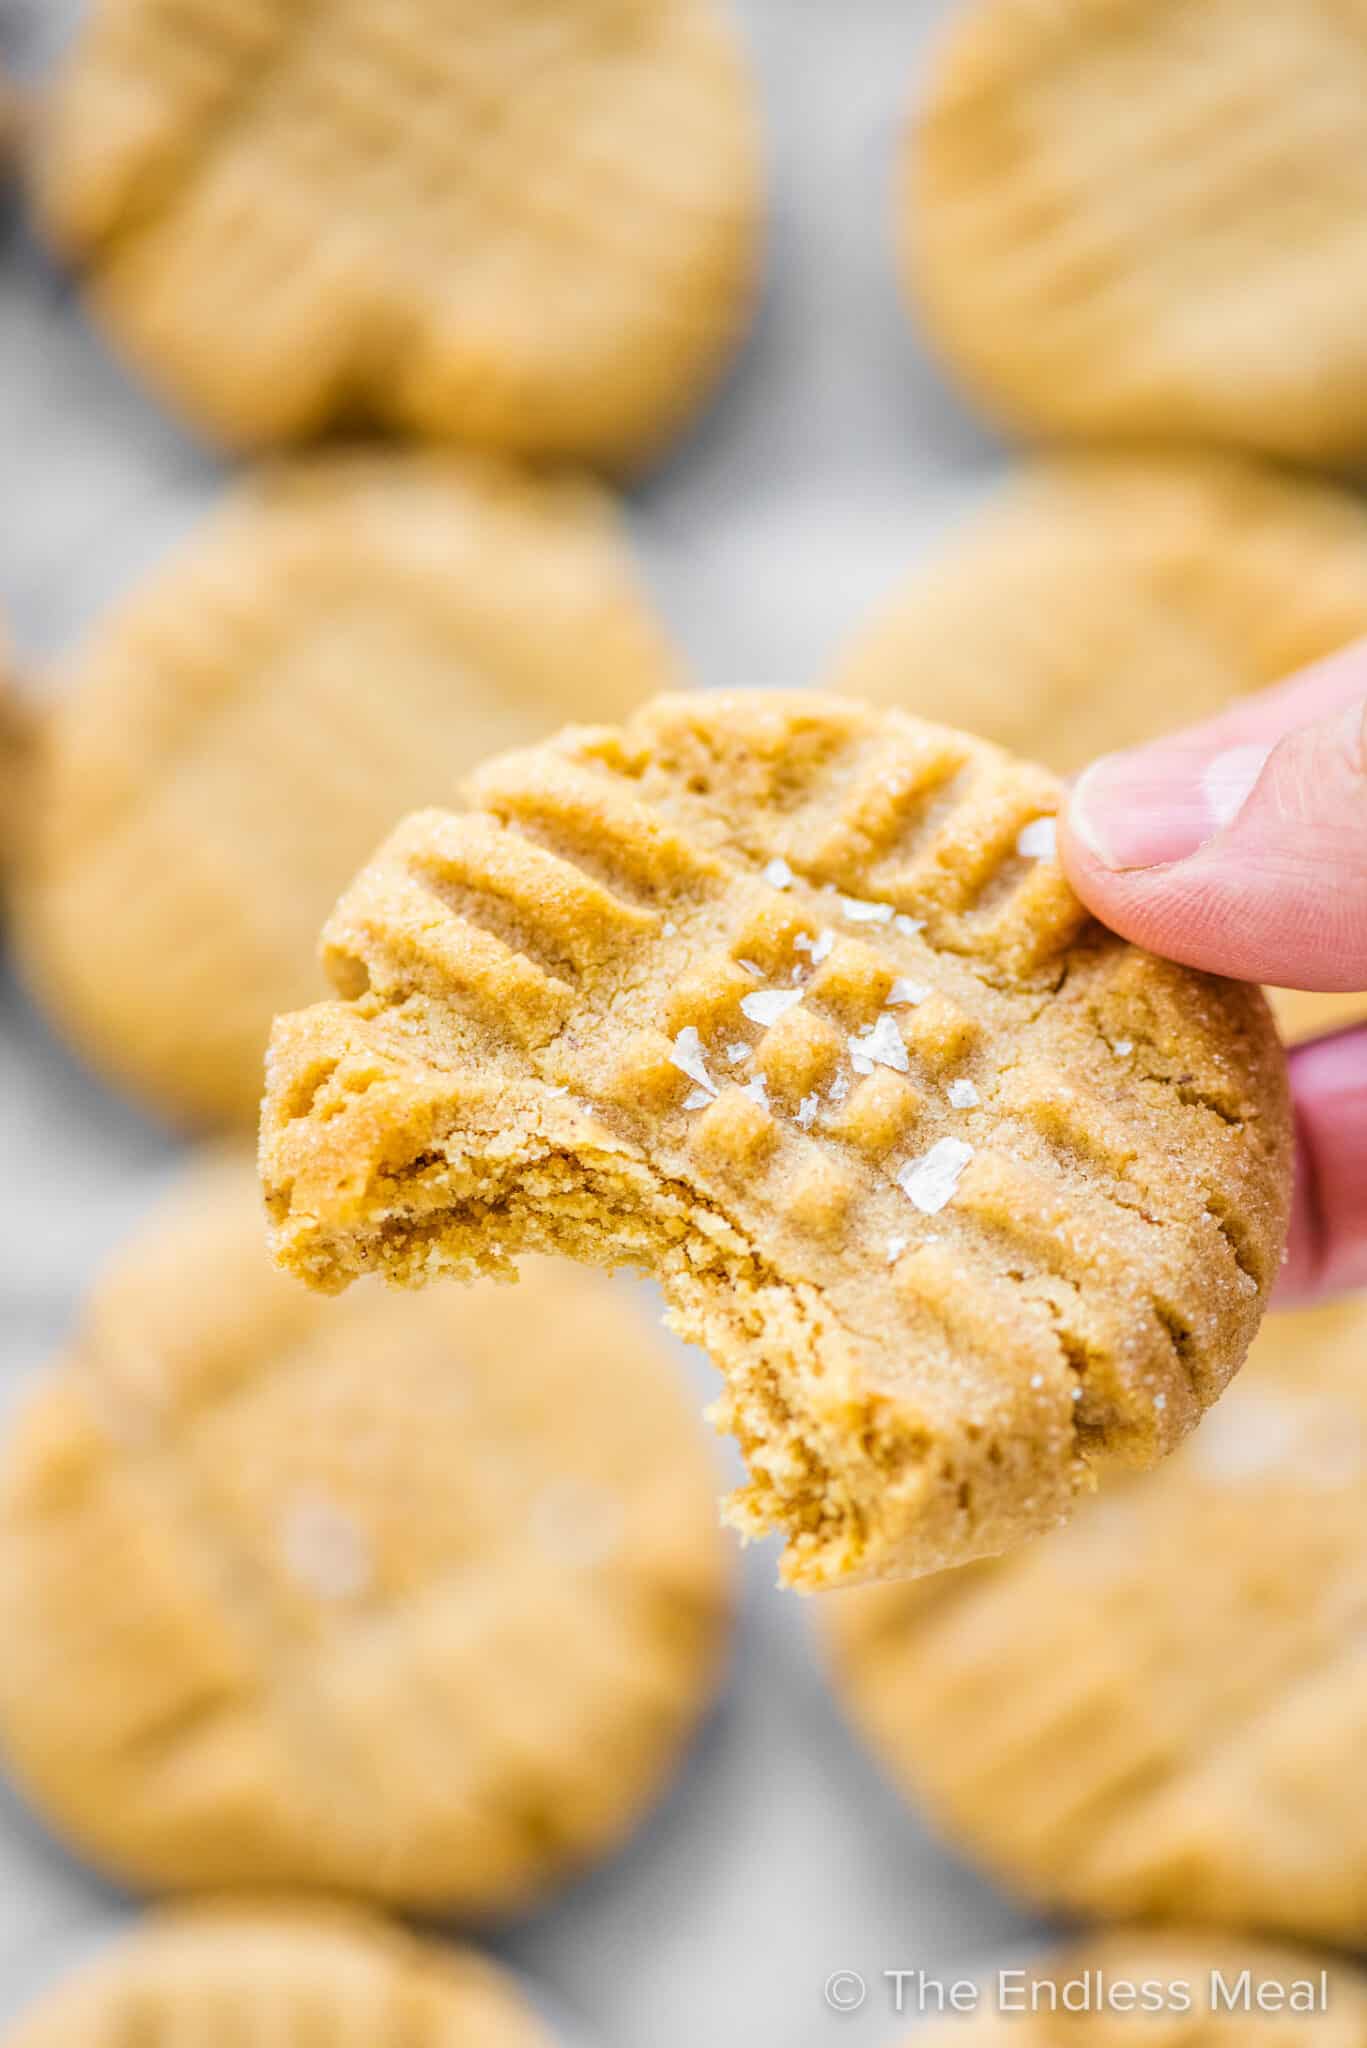 A hand holding a peanut butter cookie with a bite taken out of it .